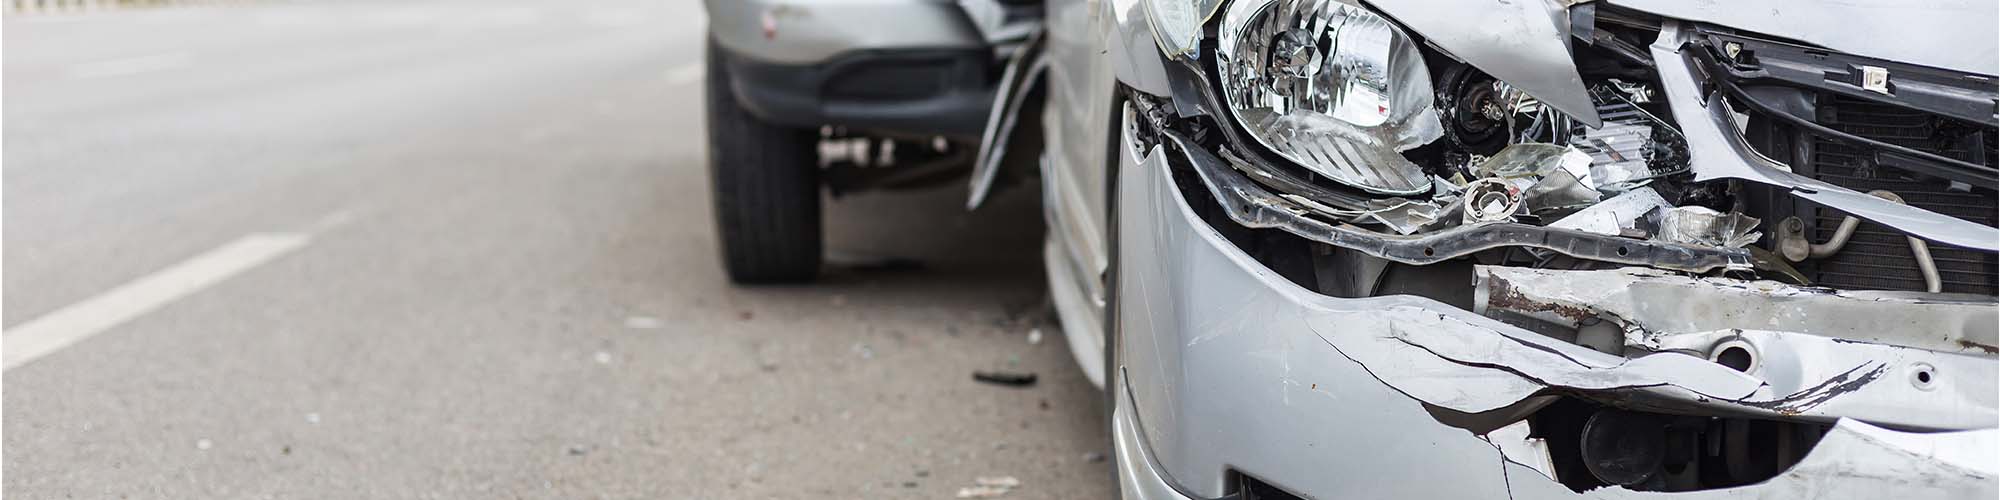 What You Should Know About Car Accidents and Brake Failure